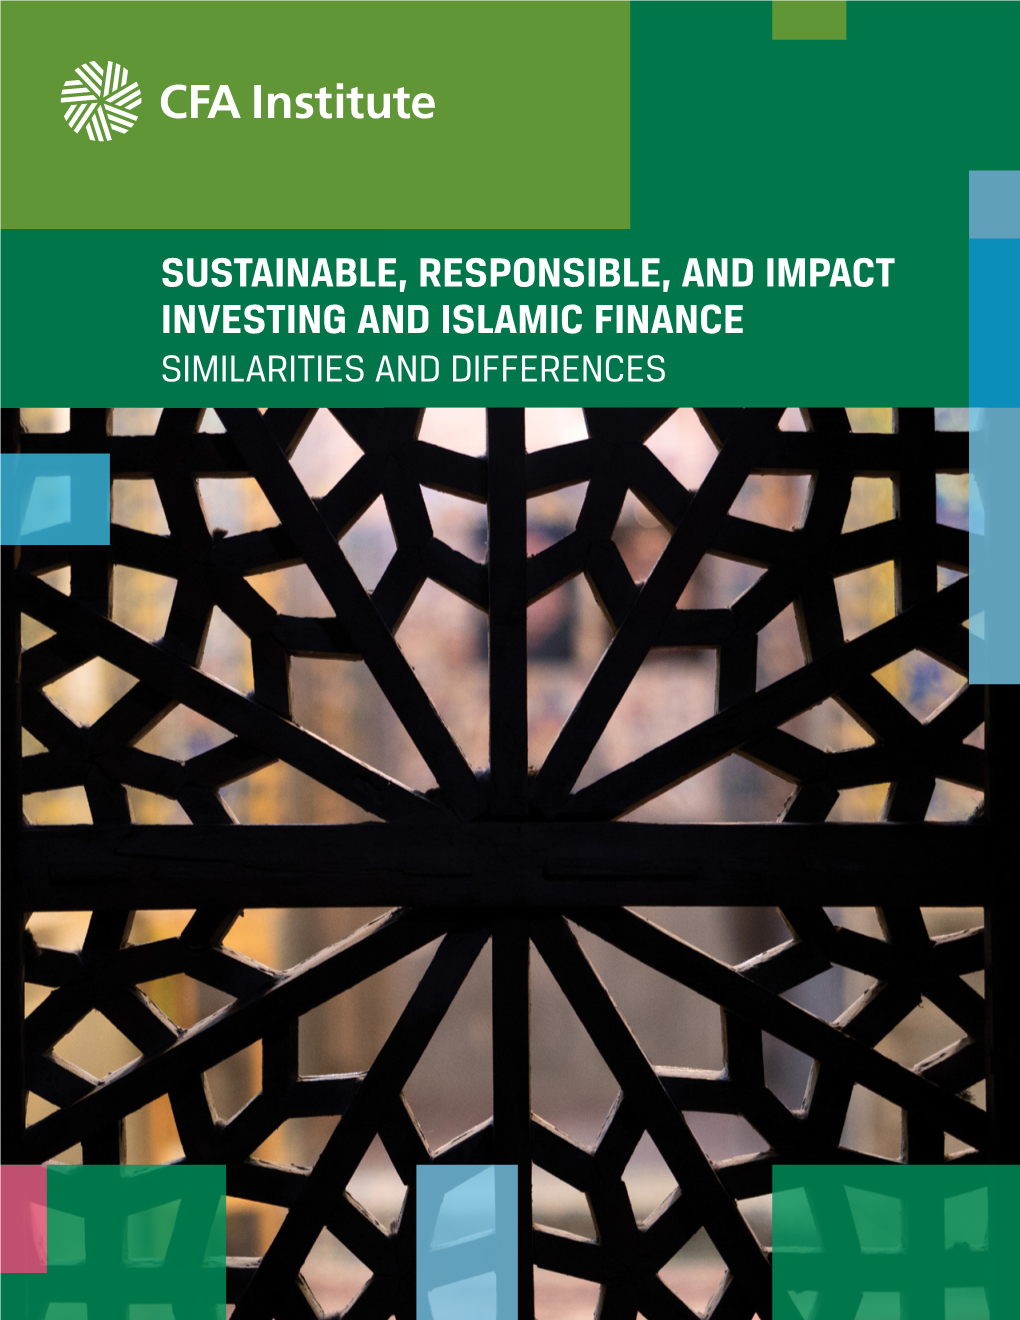 SUSTAINABLE, RESPONSIBLE, and IMPACT INVESTING and ISLAMIC FINANCE SIMILARITIES and DIFFERENCES © 2019 CFA Institute